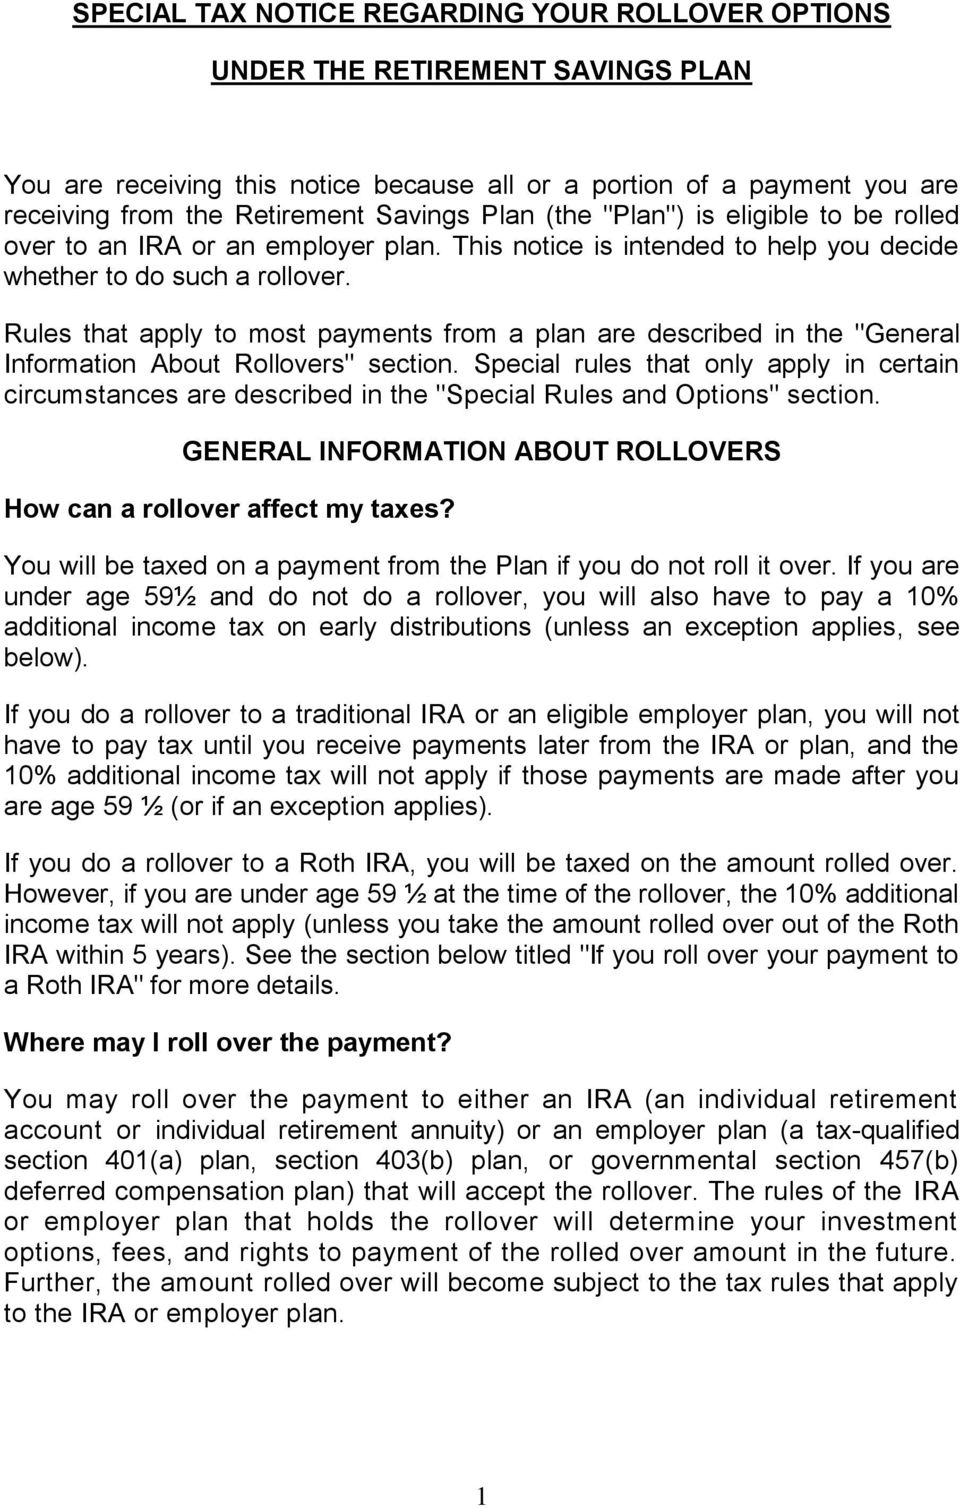 Rules that apply to most payments from a plan are described in the "General Information About Rollovers" section.